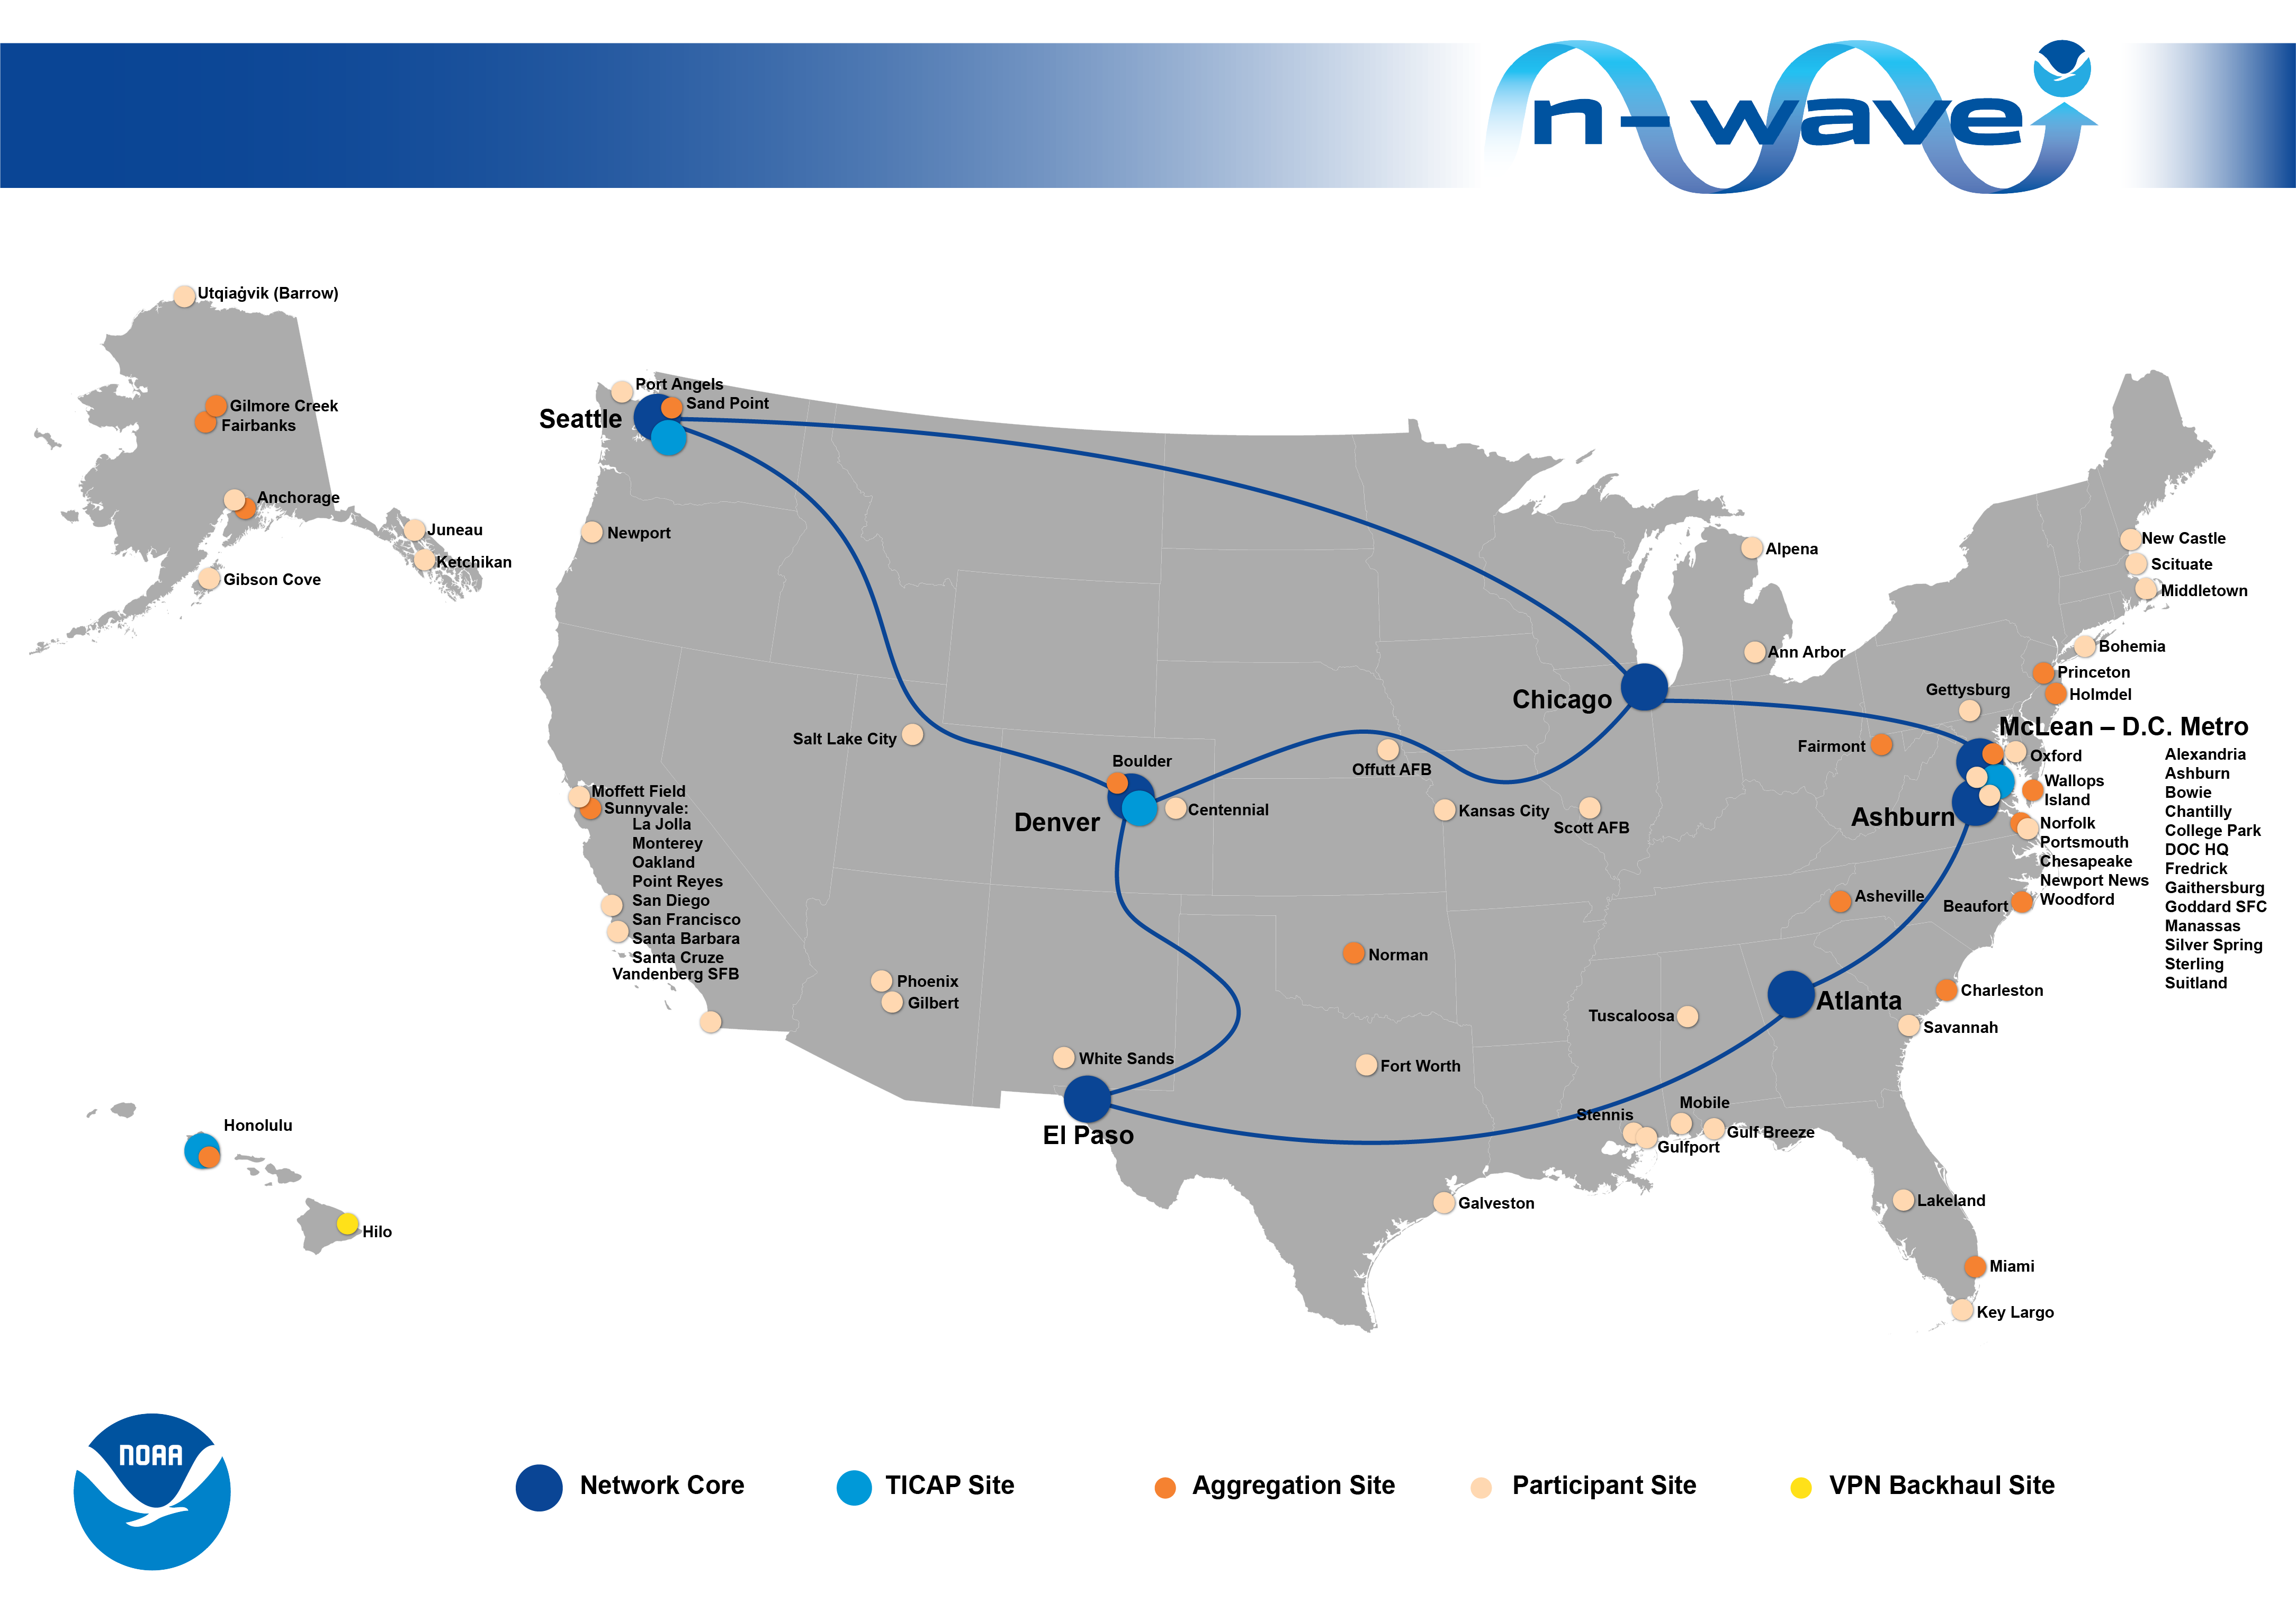 This map shows N-Wave’s traffic across its network in the U.S. and to Alaska and Hawaii, including locations for the network core, Trusted Internet Connection Access Point (TICAP) sites, aggregation sites, participant sites and Virtual Private Networking (VPN) backhaul sites.